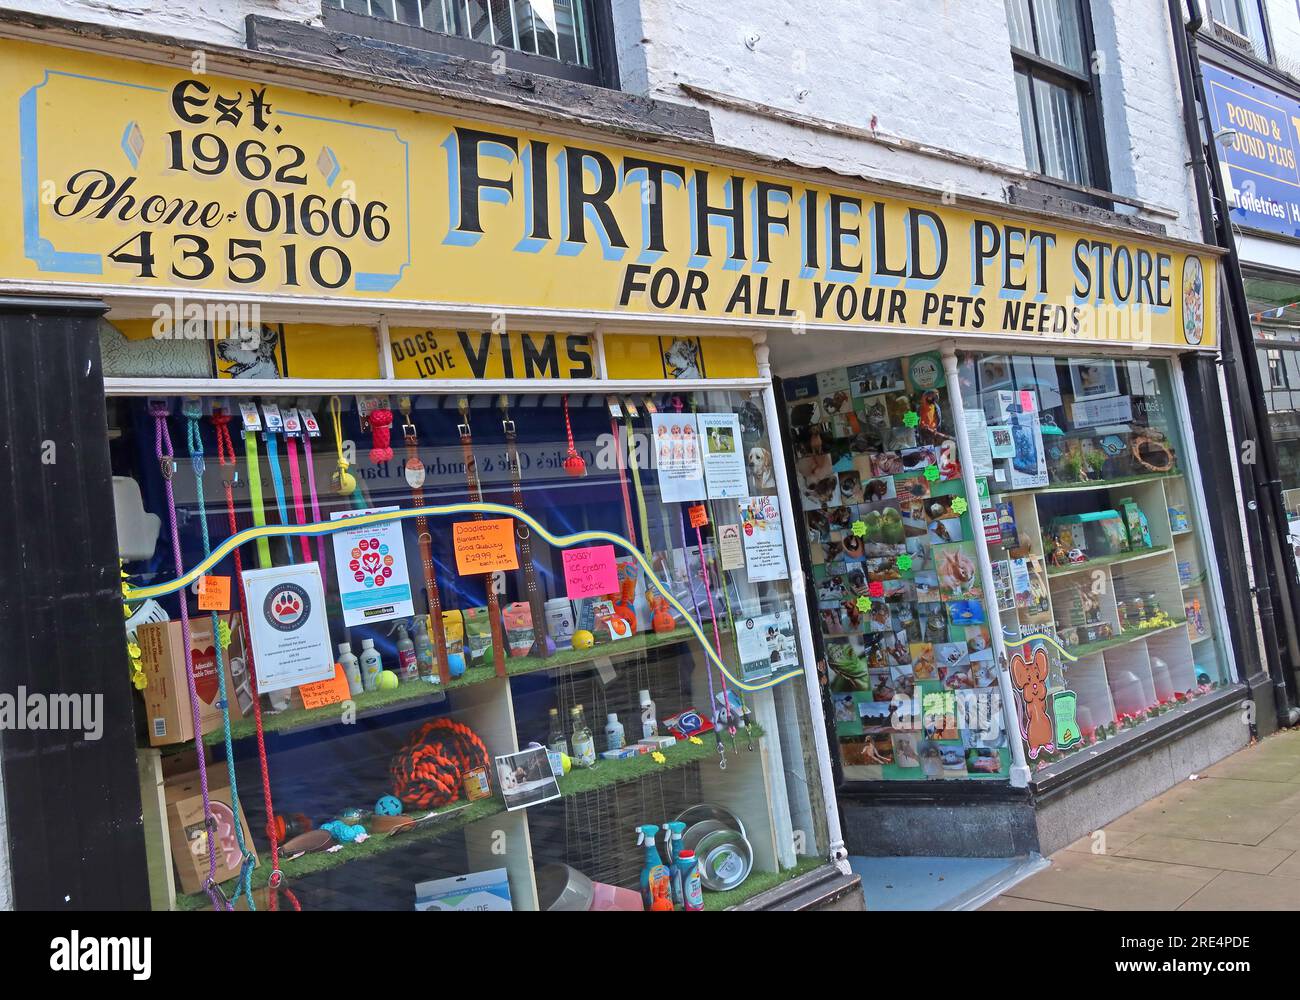 Est 1962, Firthfield Pet Store, for all your pets needs, 66 Witton St, Northwich, Cheshire, England, UK,  CW9 5AE Stock Photo